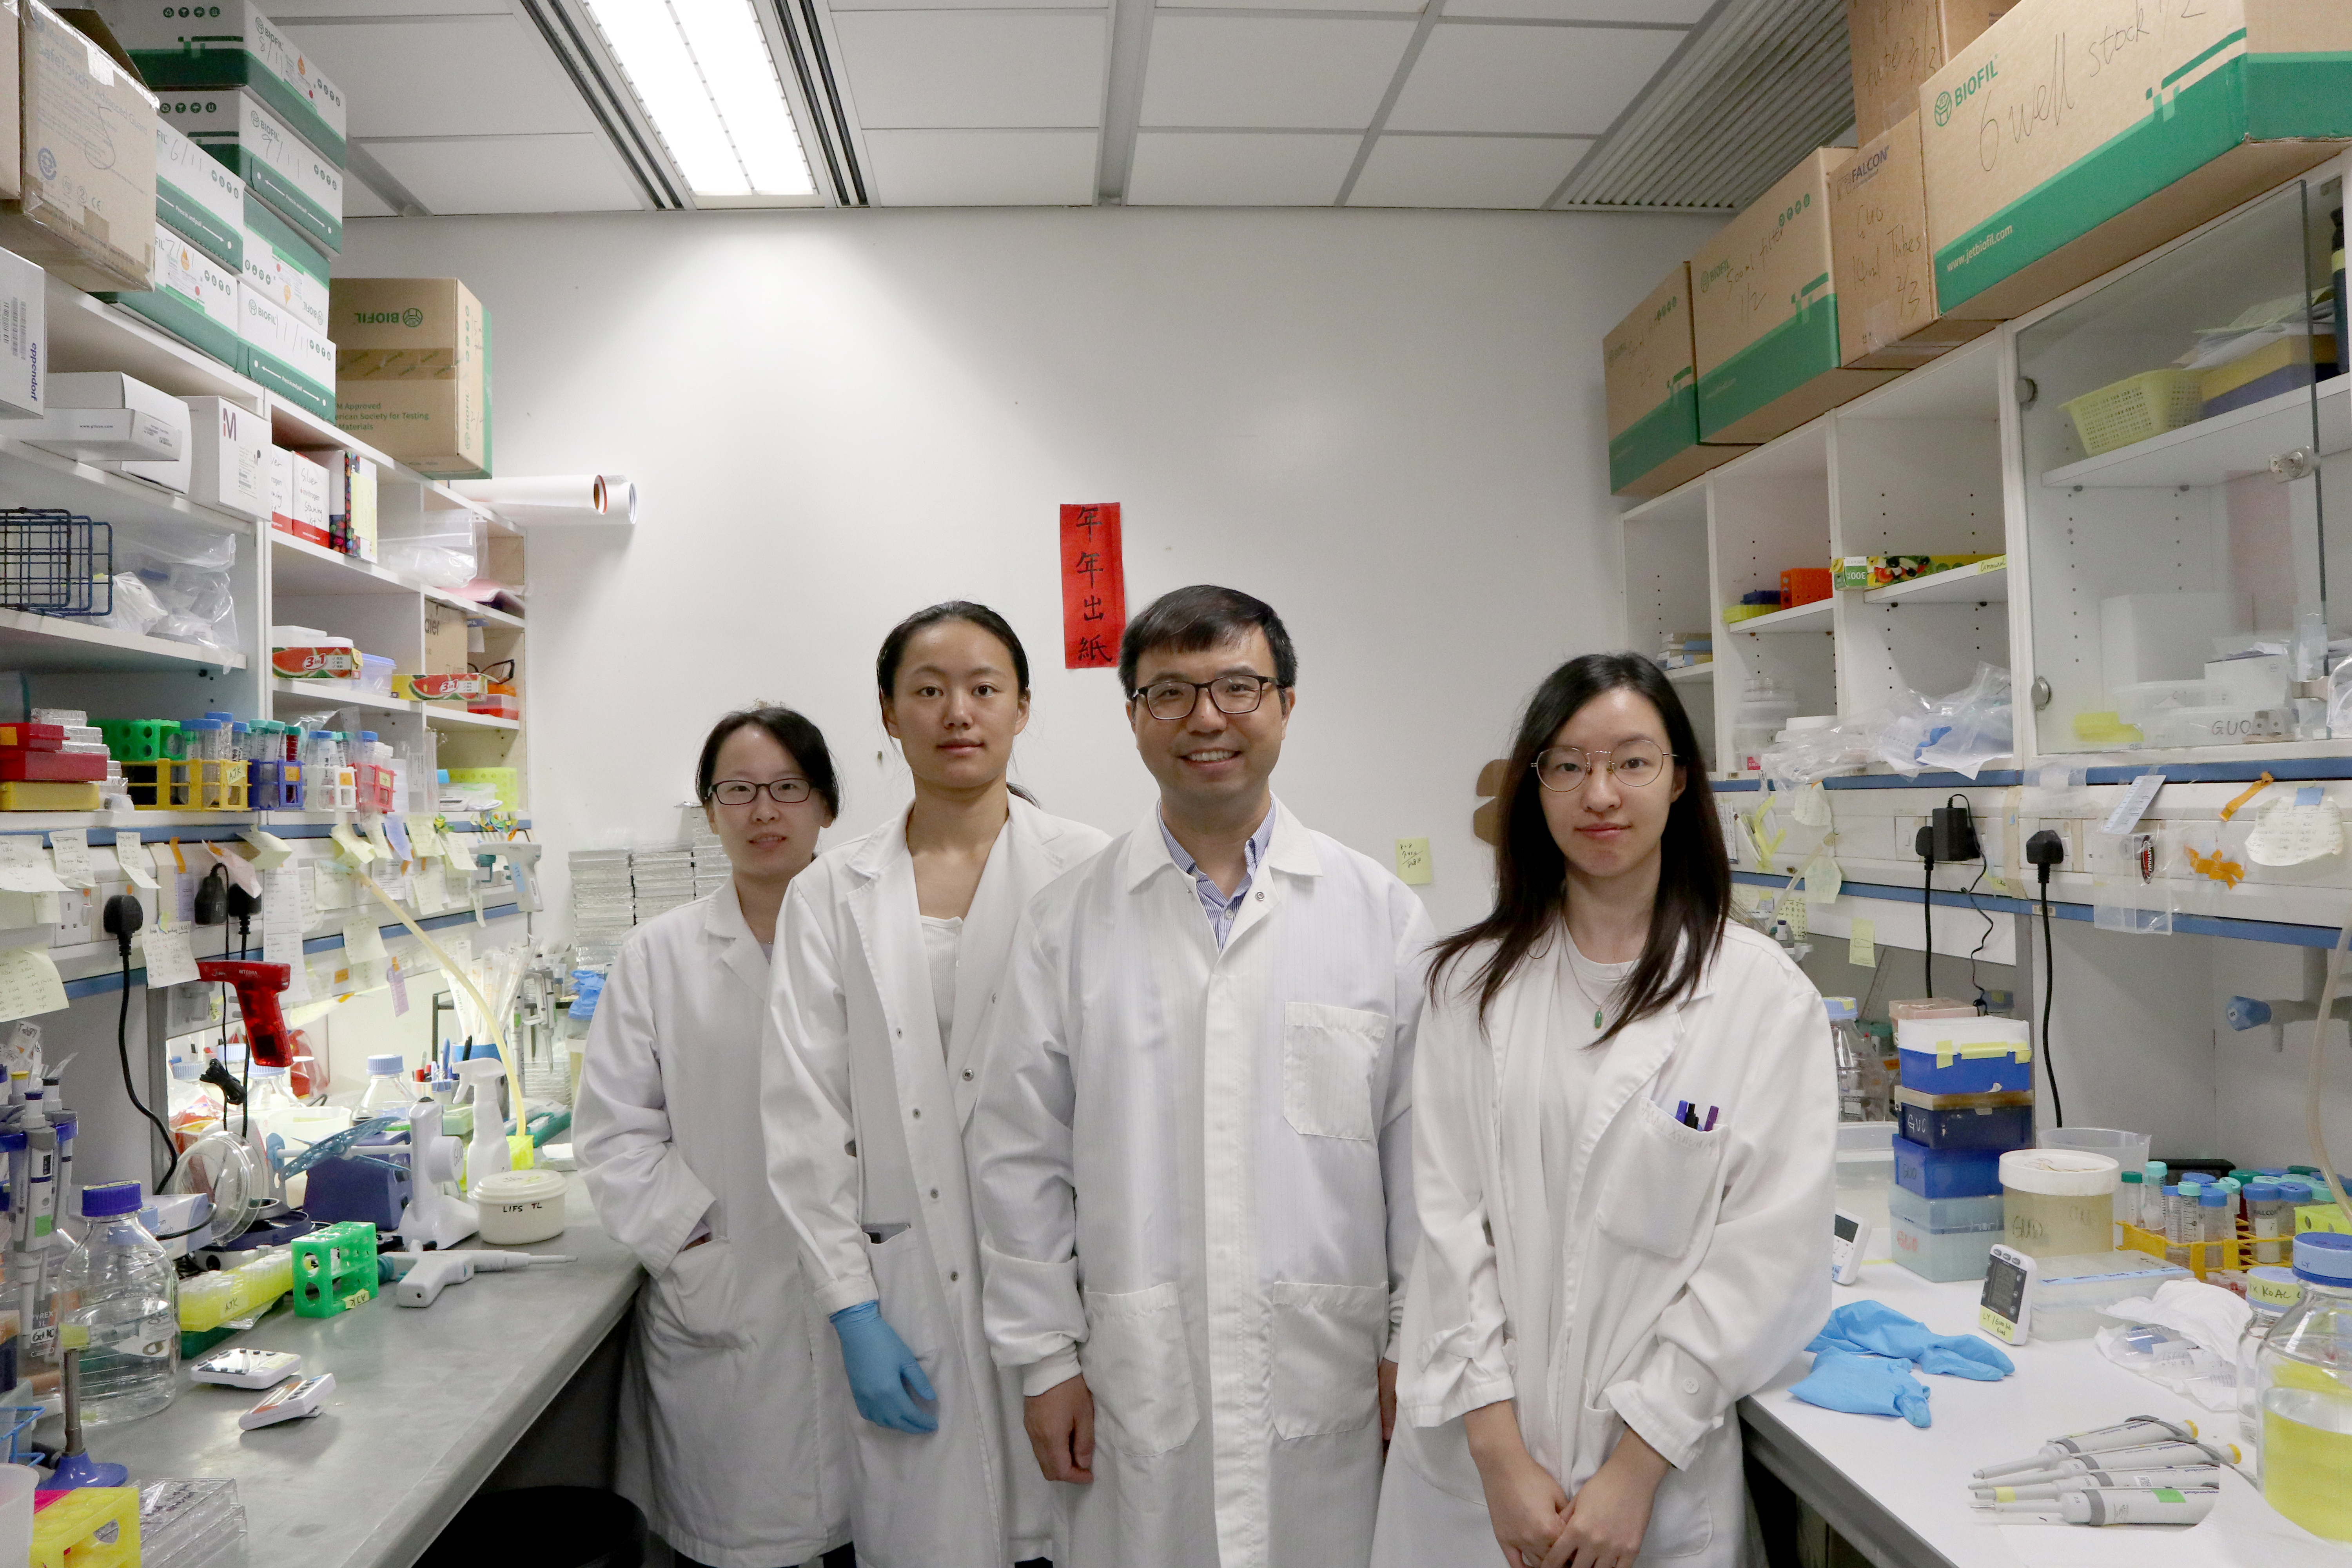 Prof. GUO Yusong (second right), Associate Professor in HKUST’s Division of Life Science, and his team members